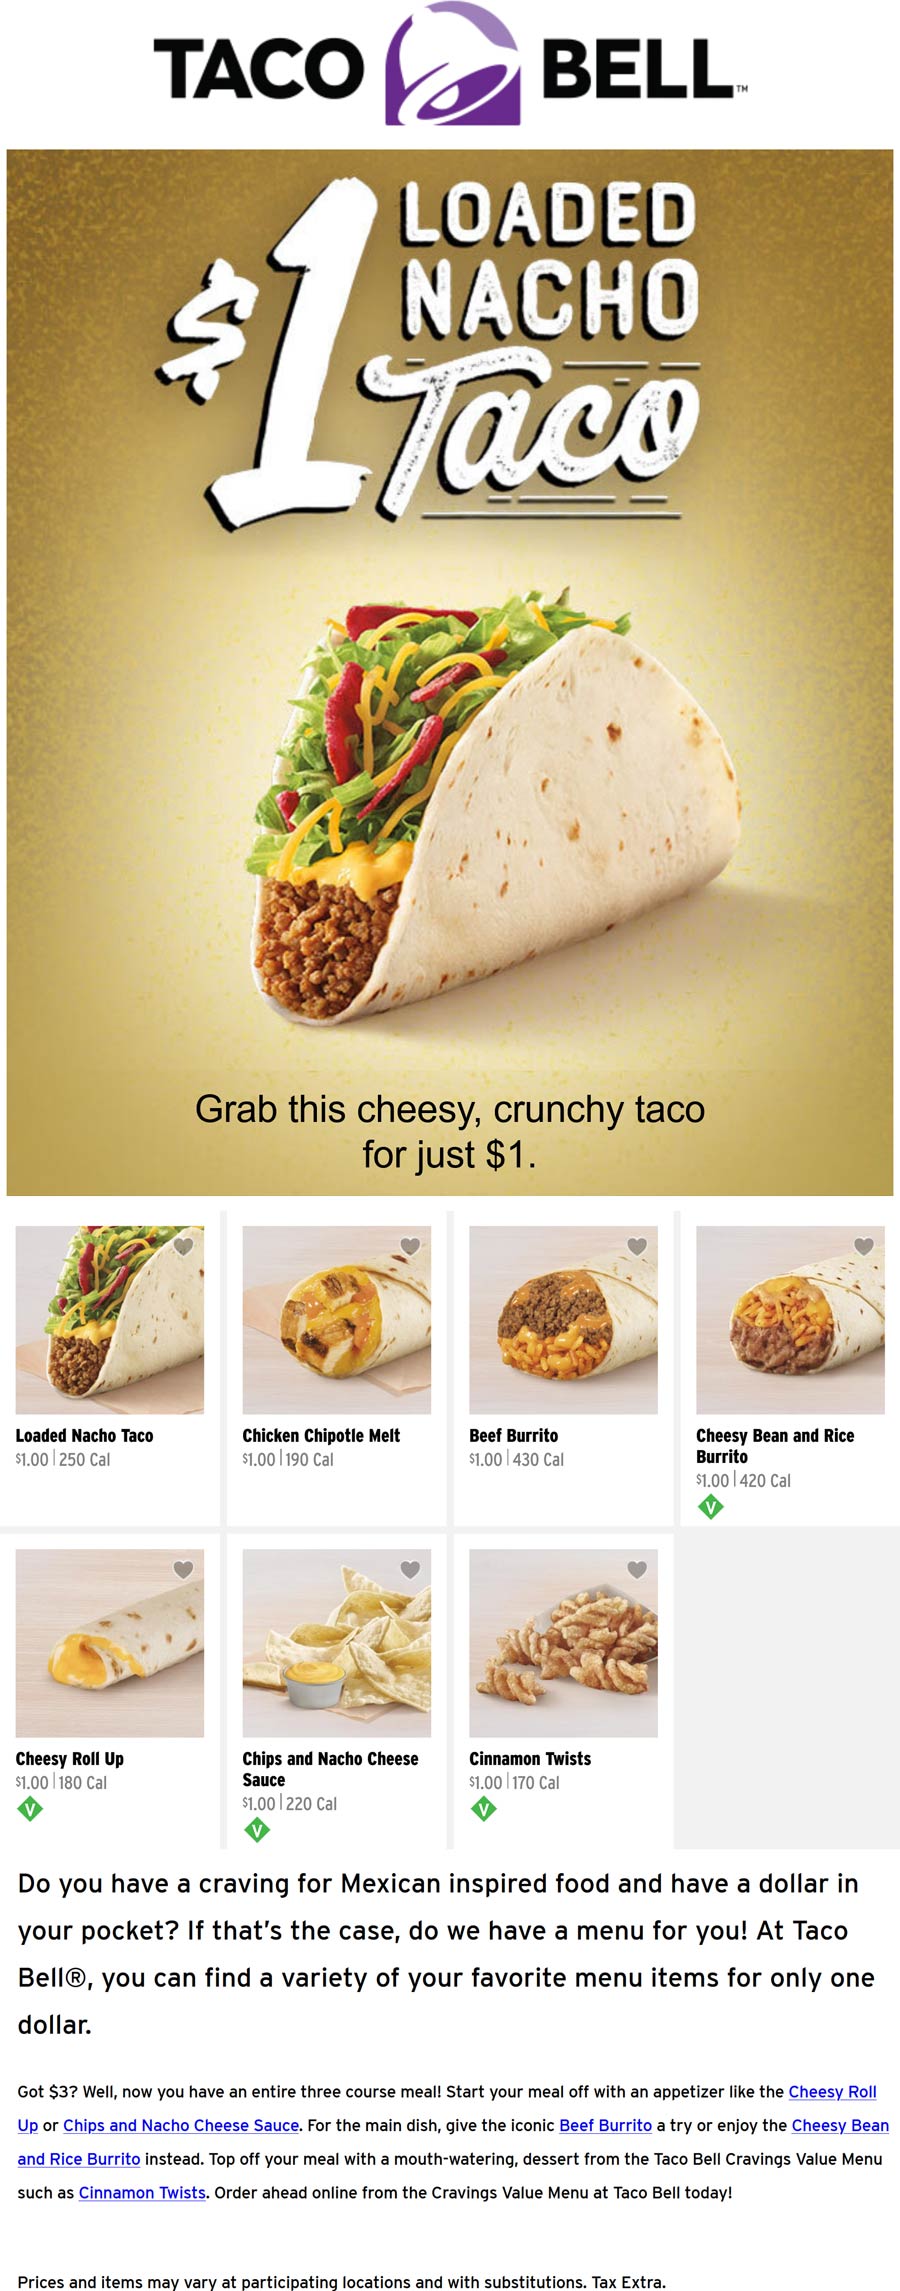 loaded-nacho-taco-more-on-the-1-value-menu-at-taco-bell-tacobell